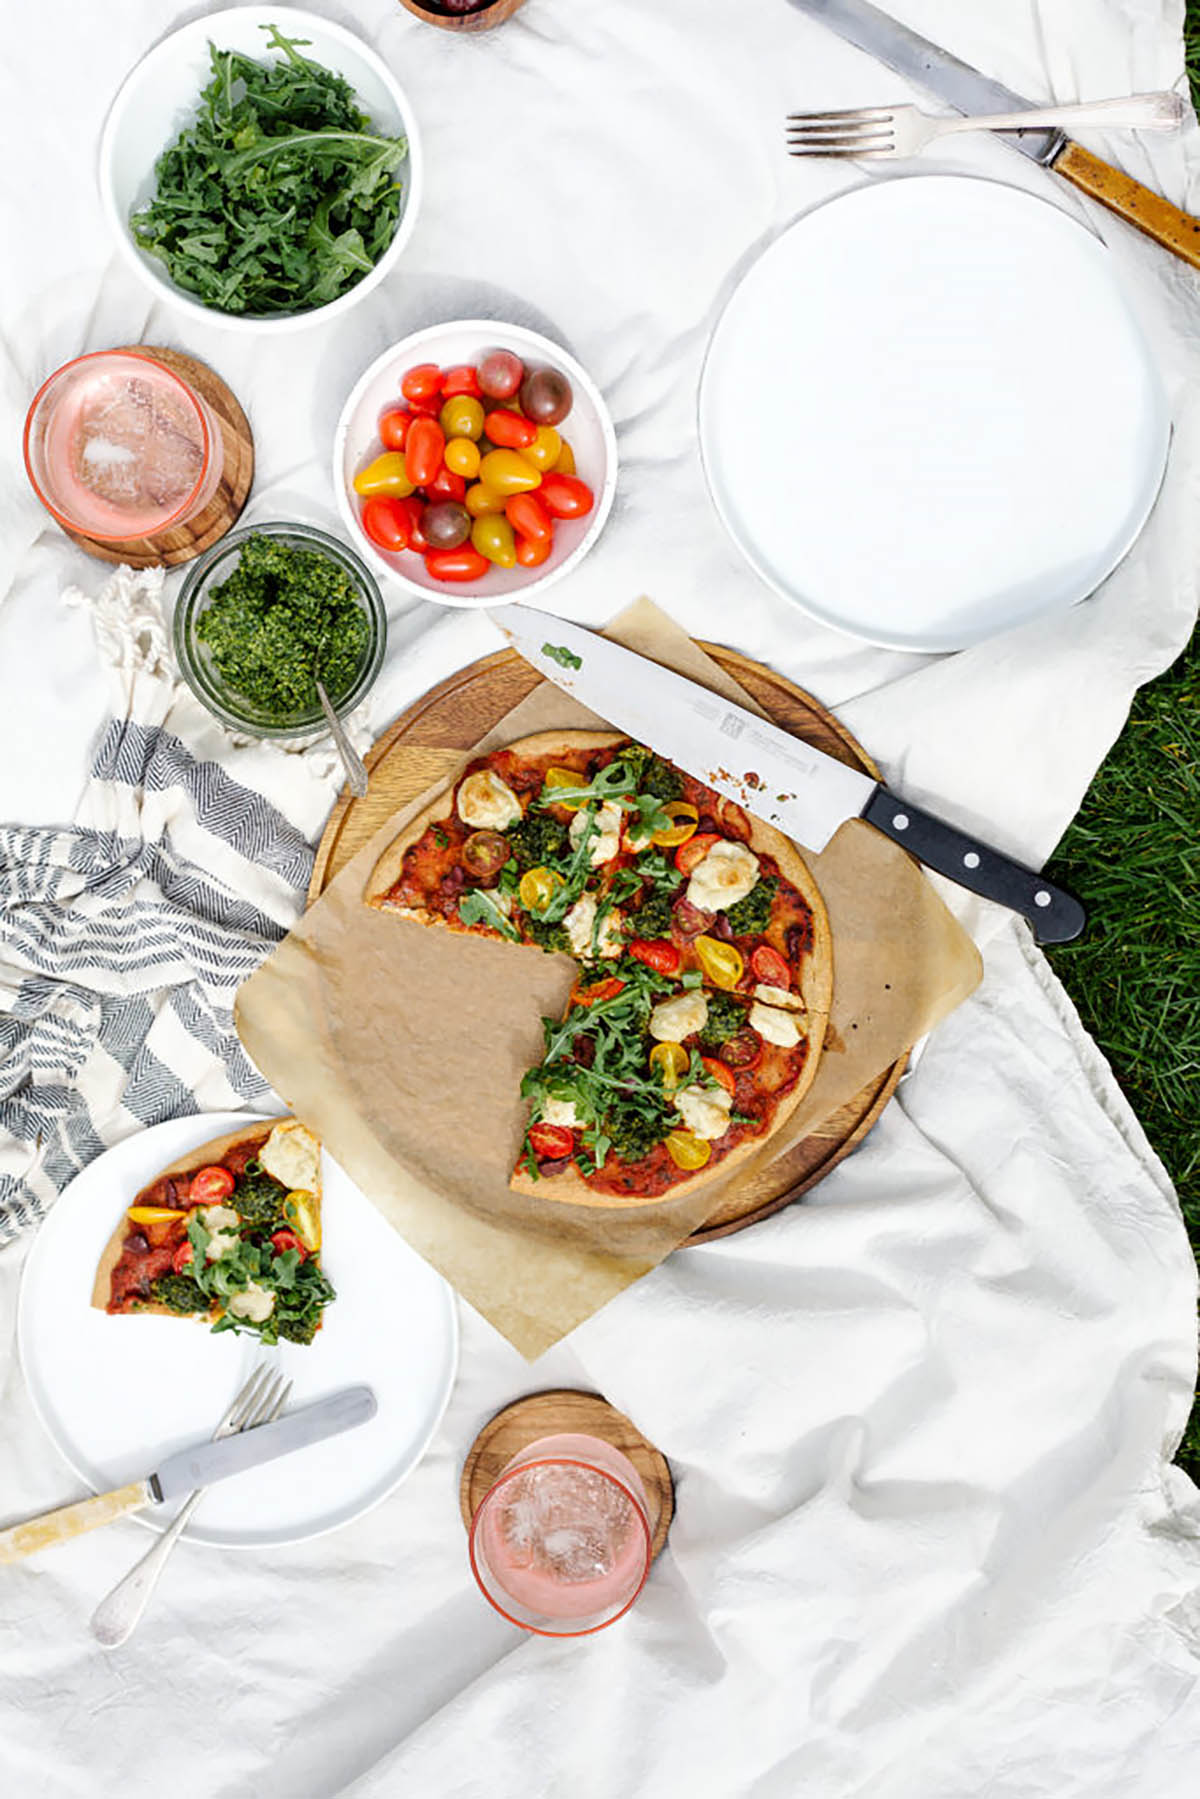 A small pizza in a picnic setting with a slice cut.